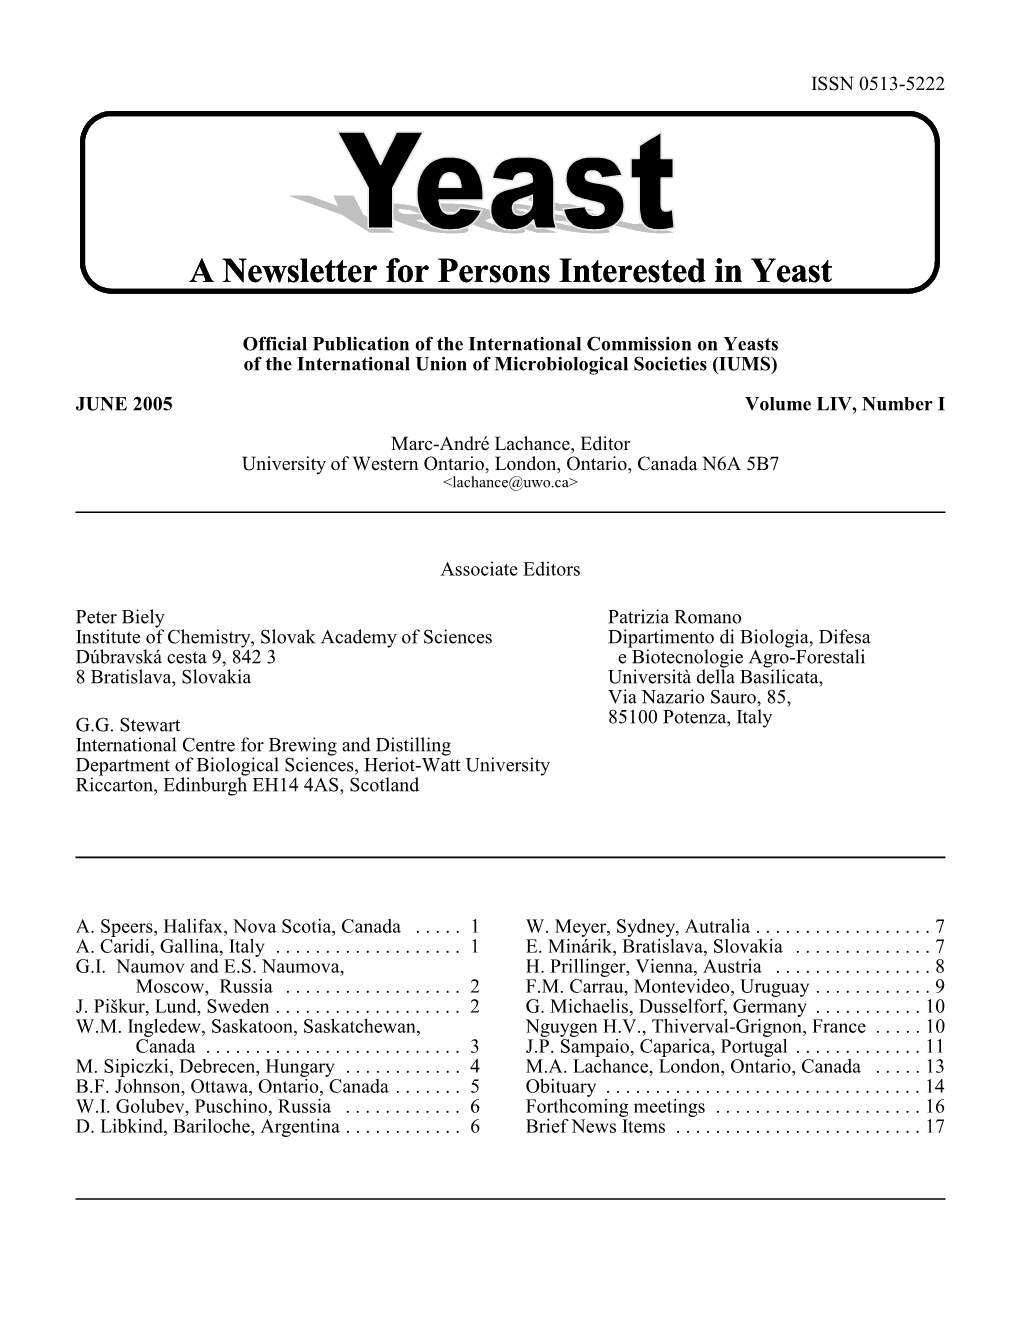 A Newsletter for Persons Interested in Yeast